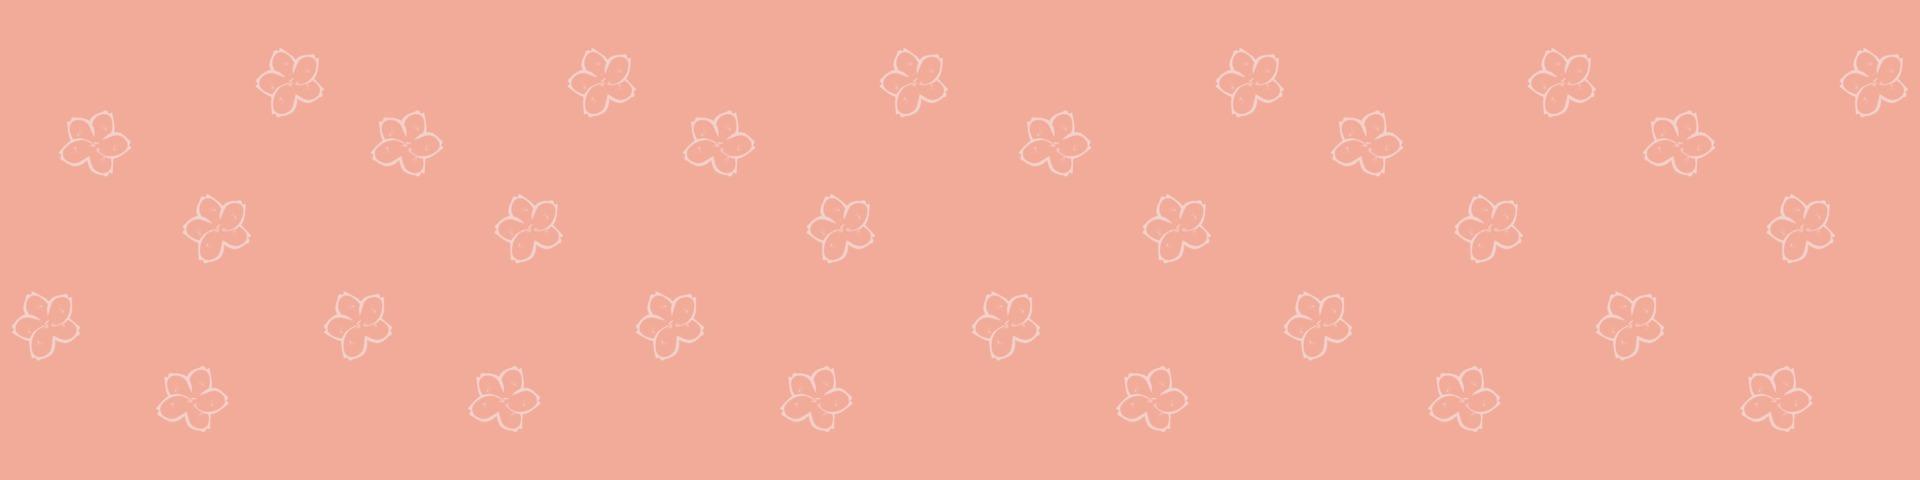 flowers on pink background vector